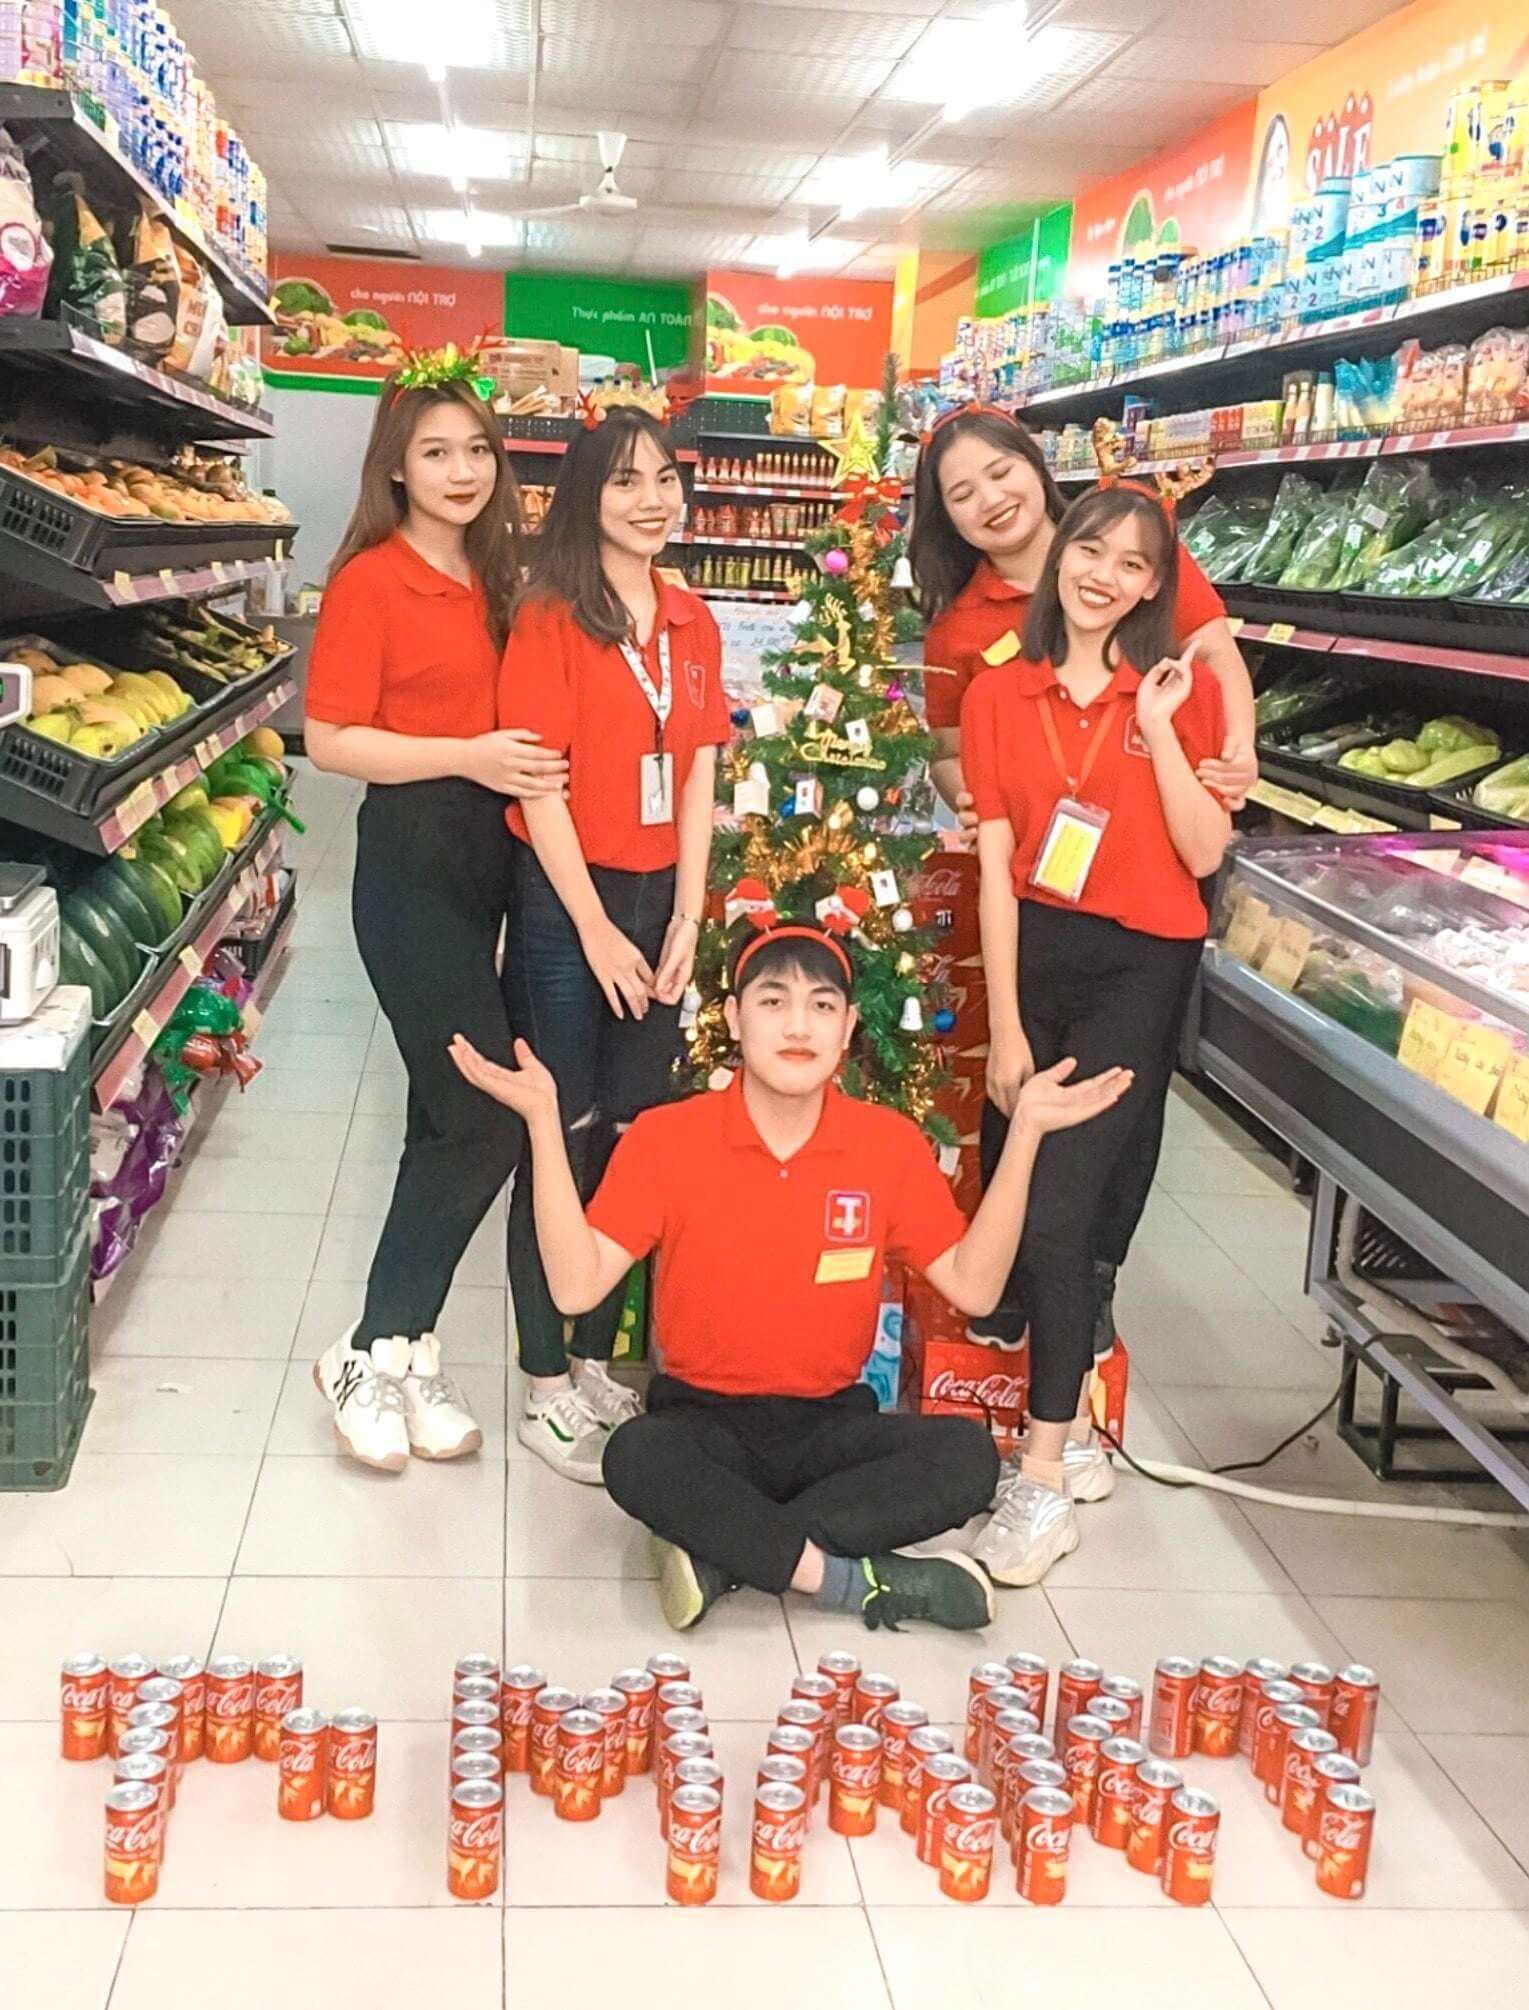 Jobs at Công Ty Cổ Phần T-Martstores